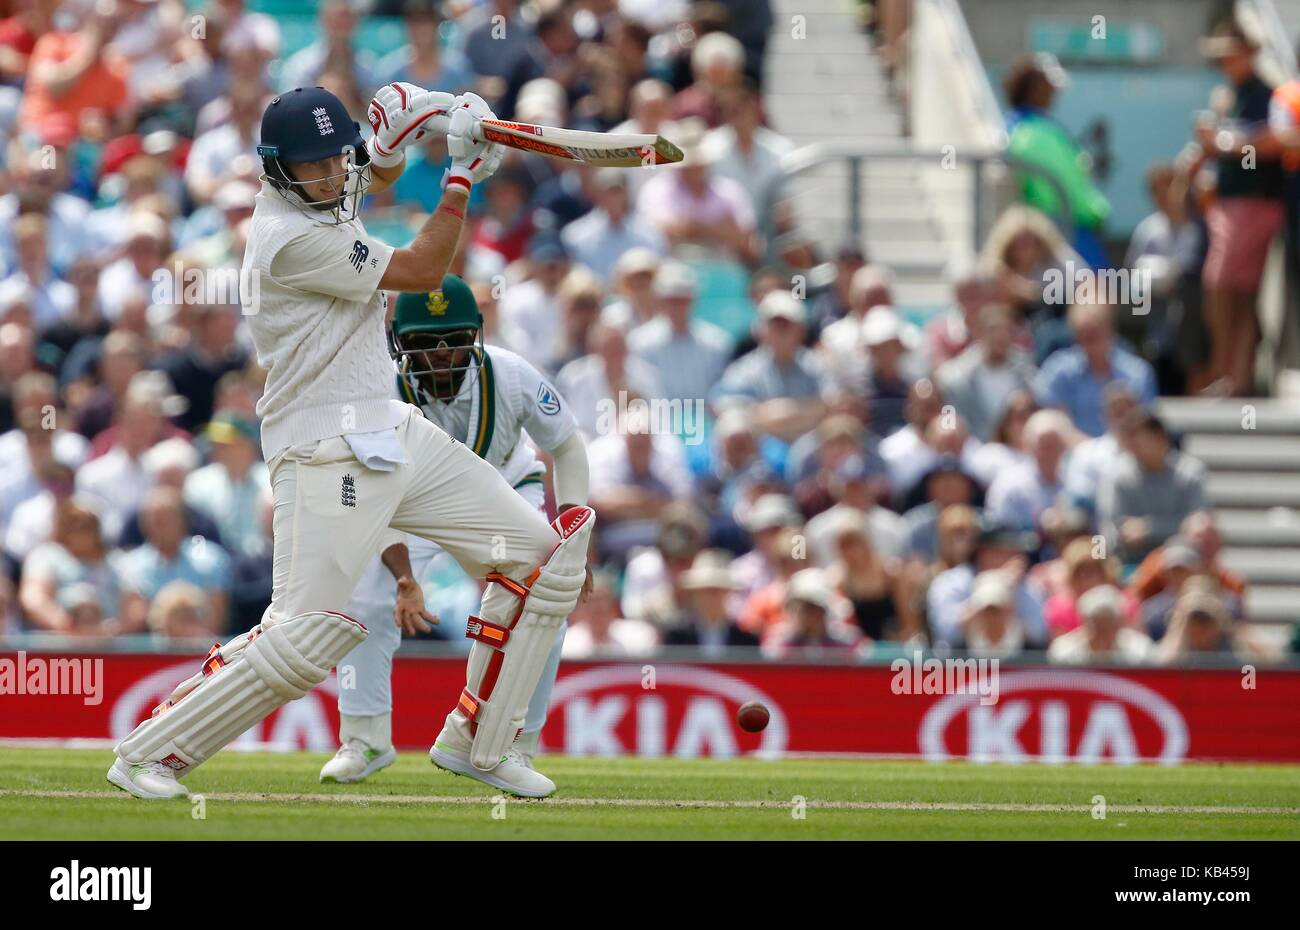 Joe Root of England during day one of the third Investec Test match between England and South Africa at The Oval in London. 27 Jul 2017 Stock Photo